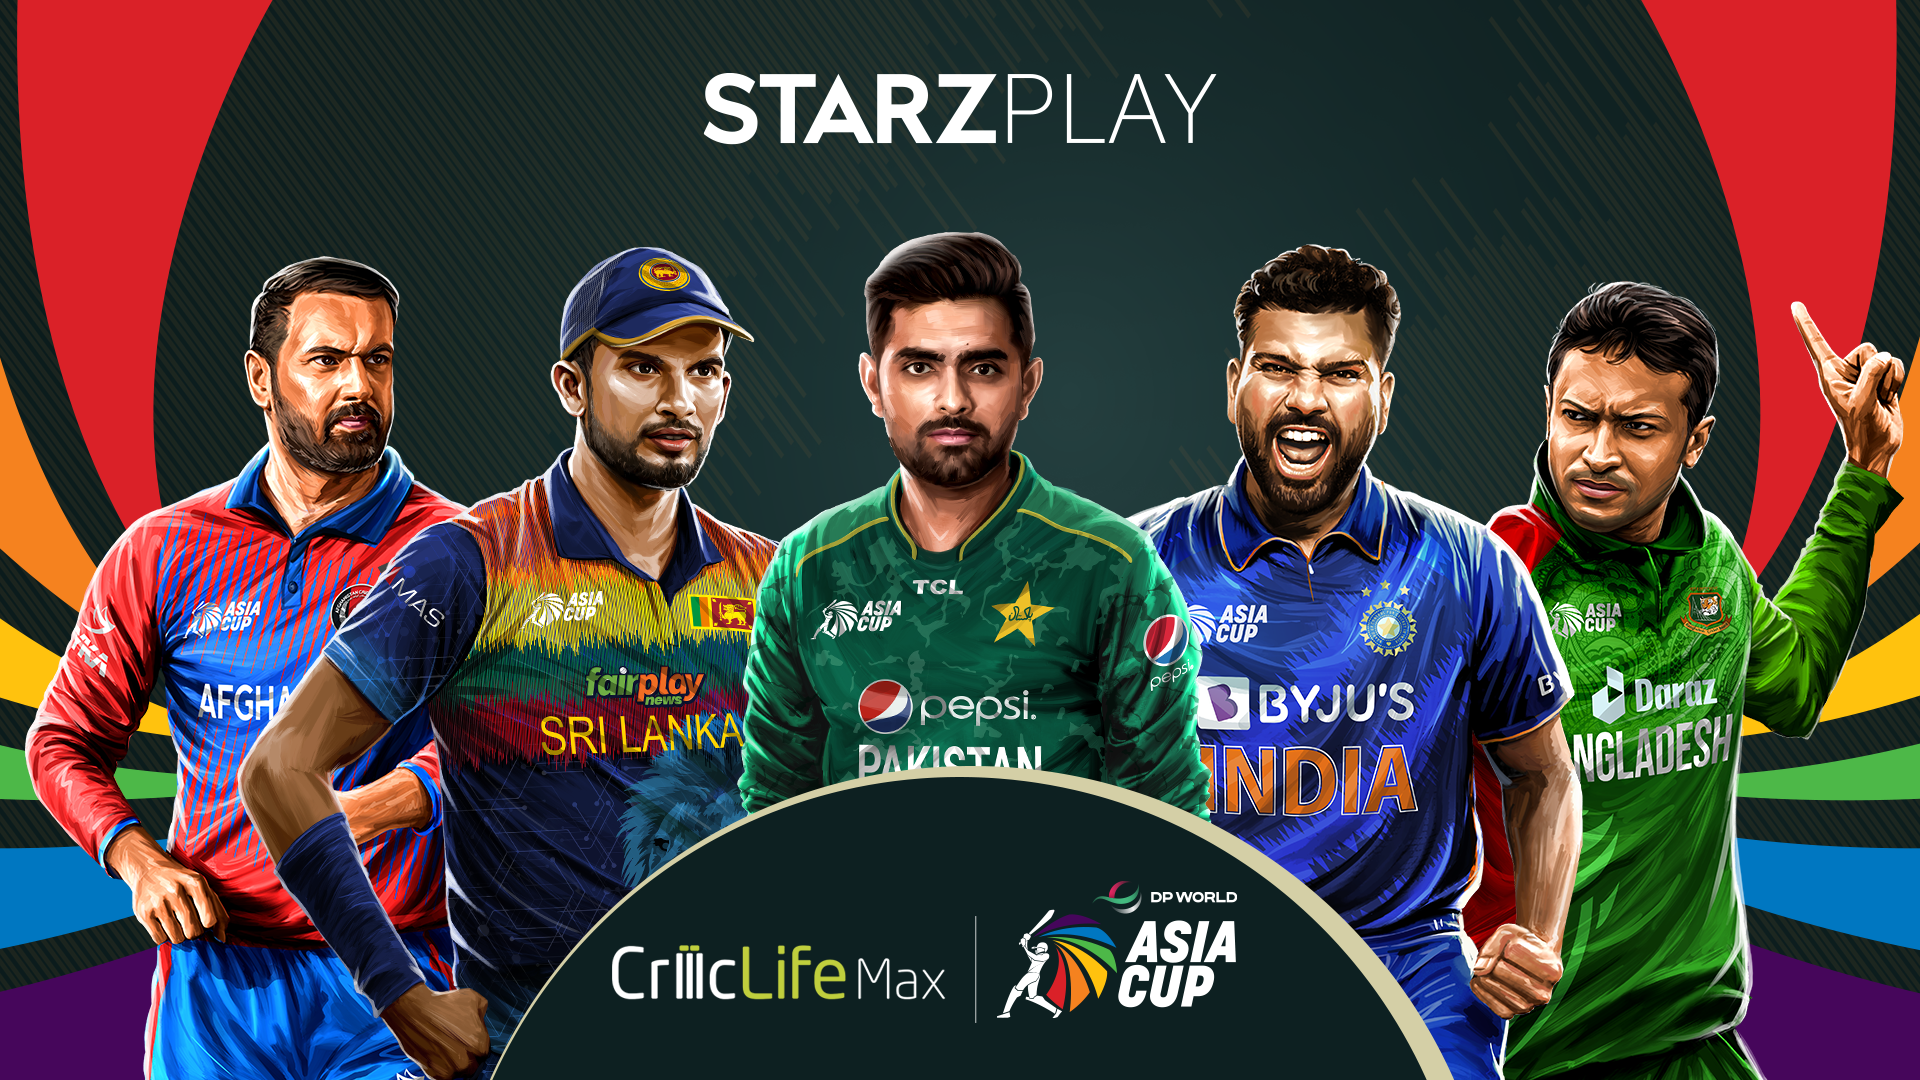 cricket asia cup 2022 live video